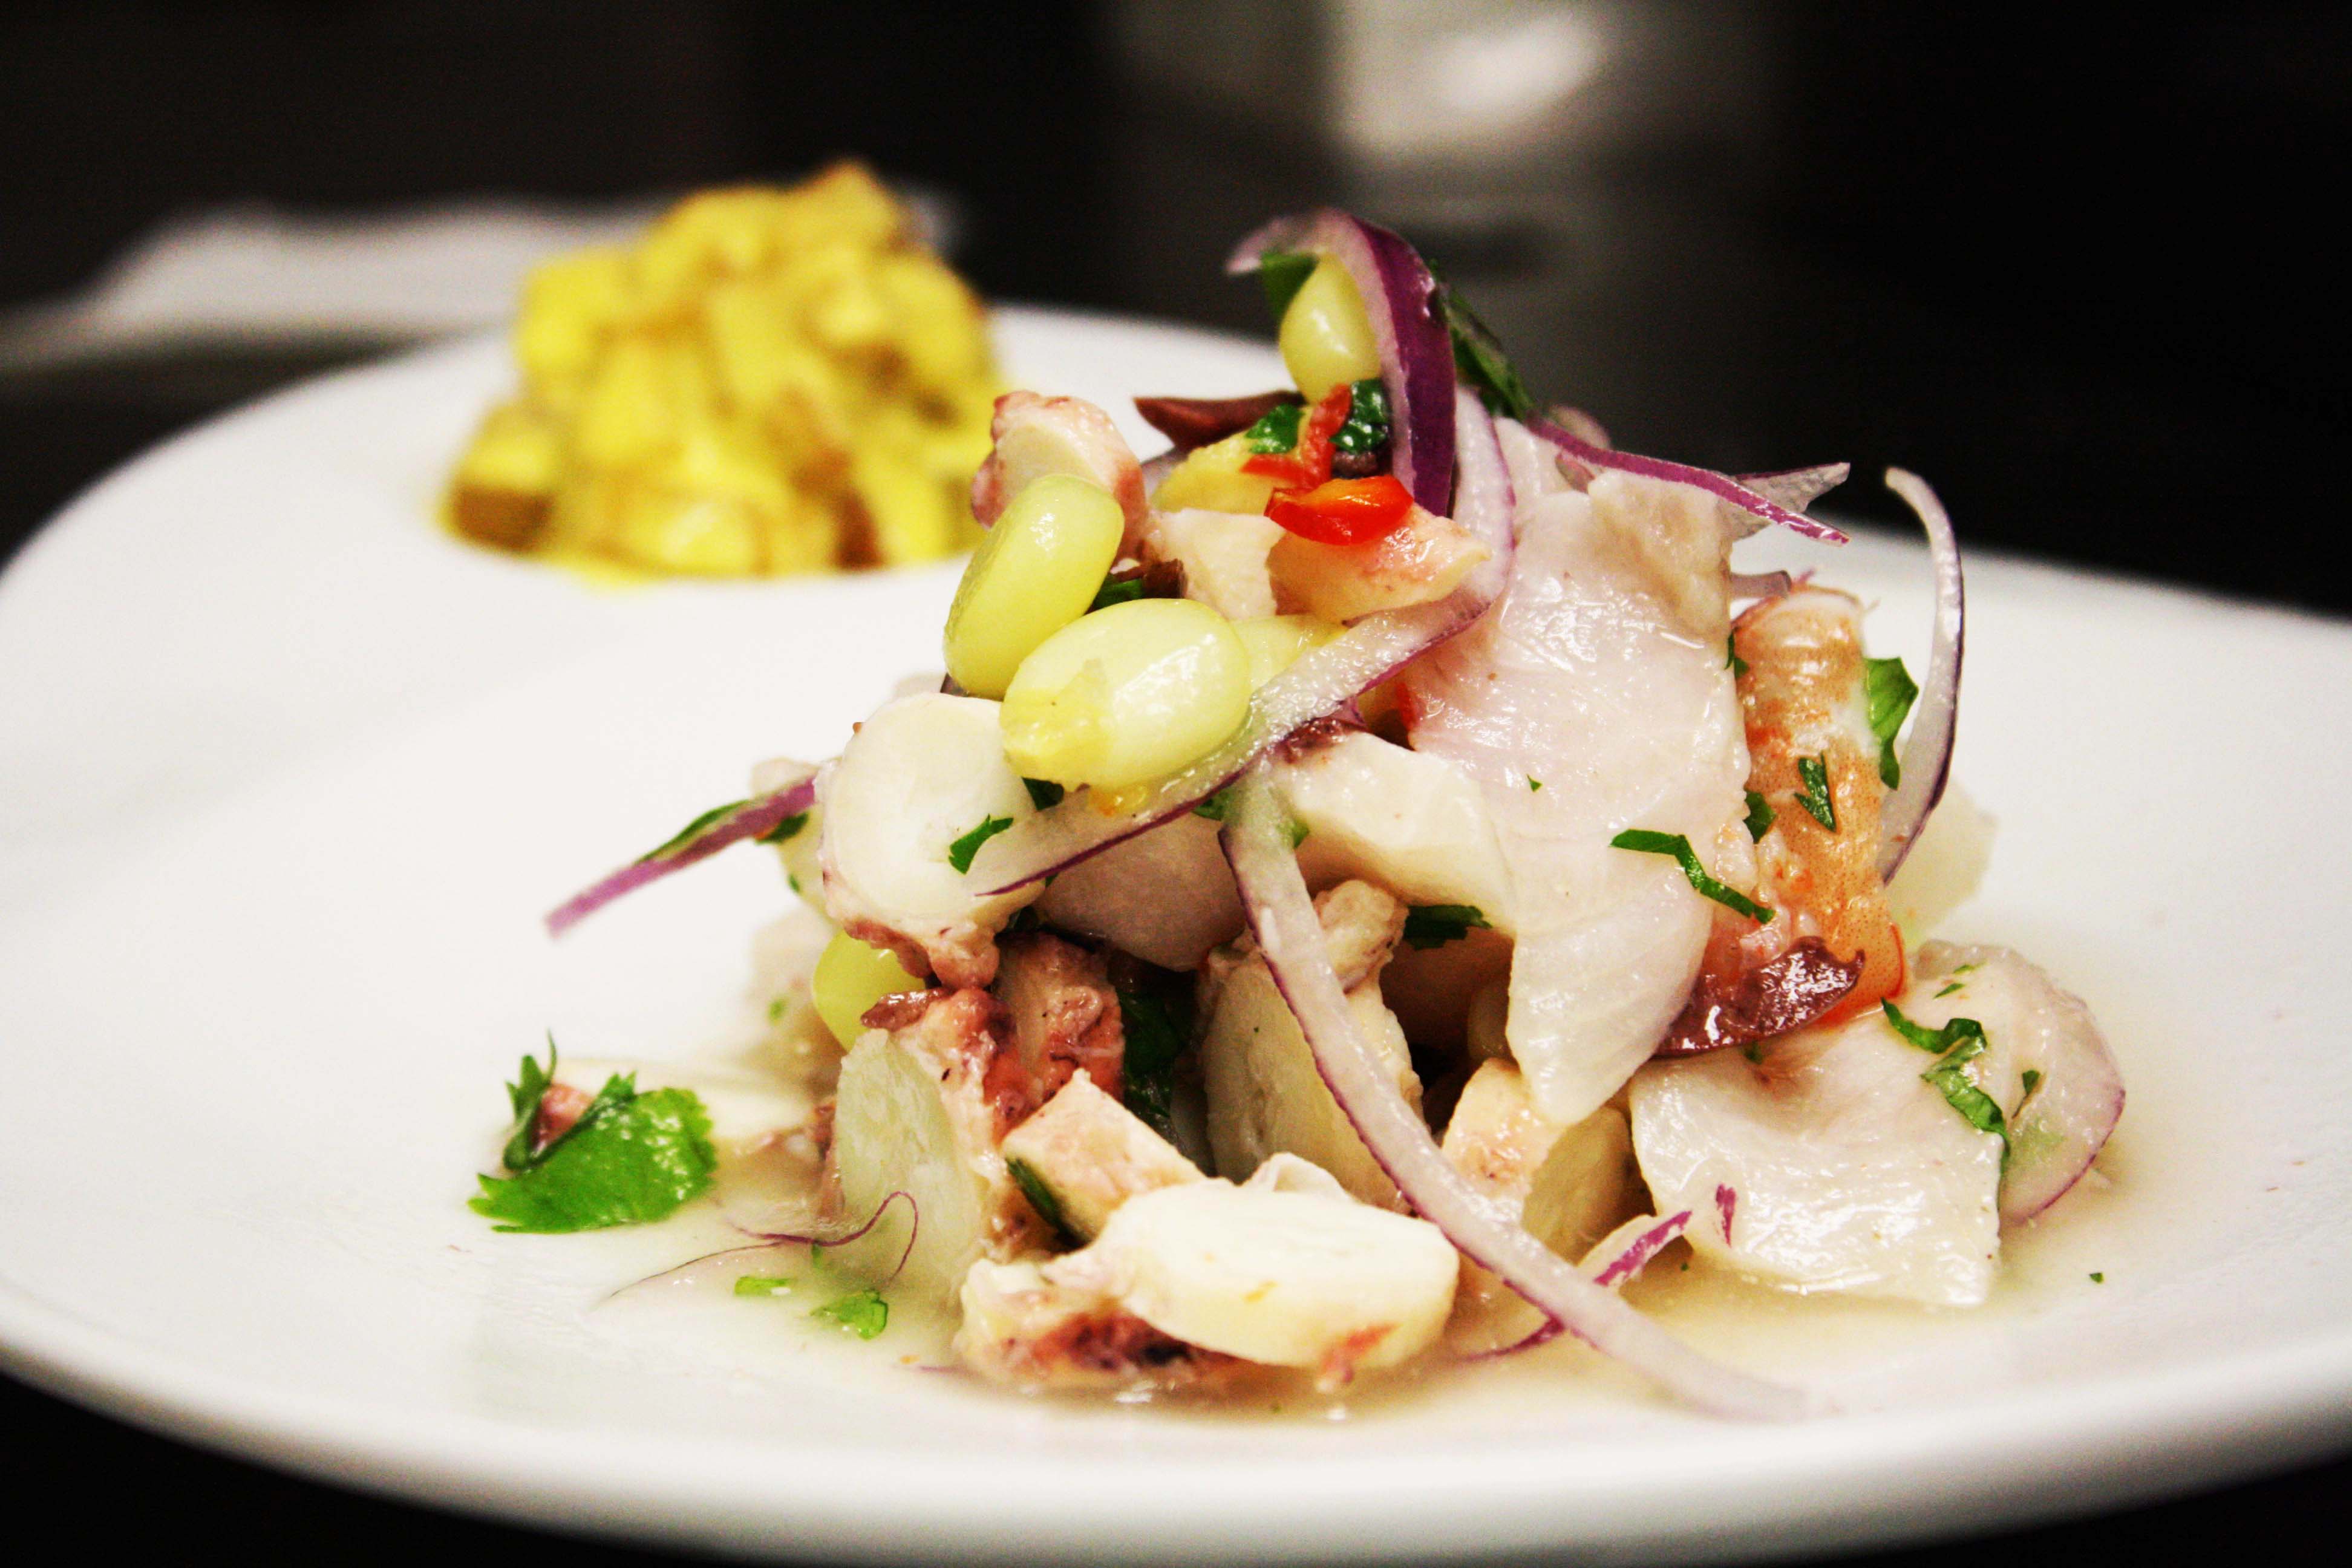 Mixed Seafood Ceviche Recipe.